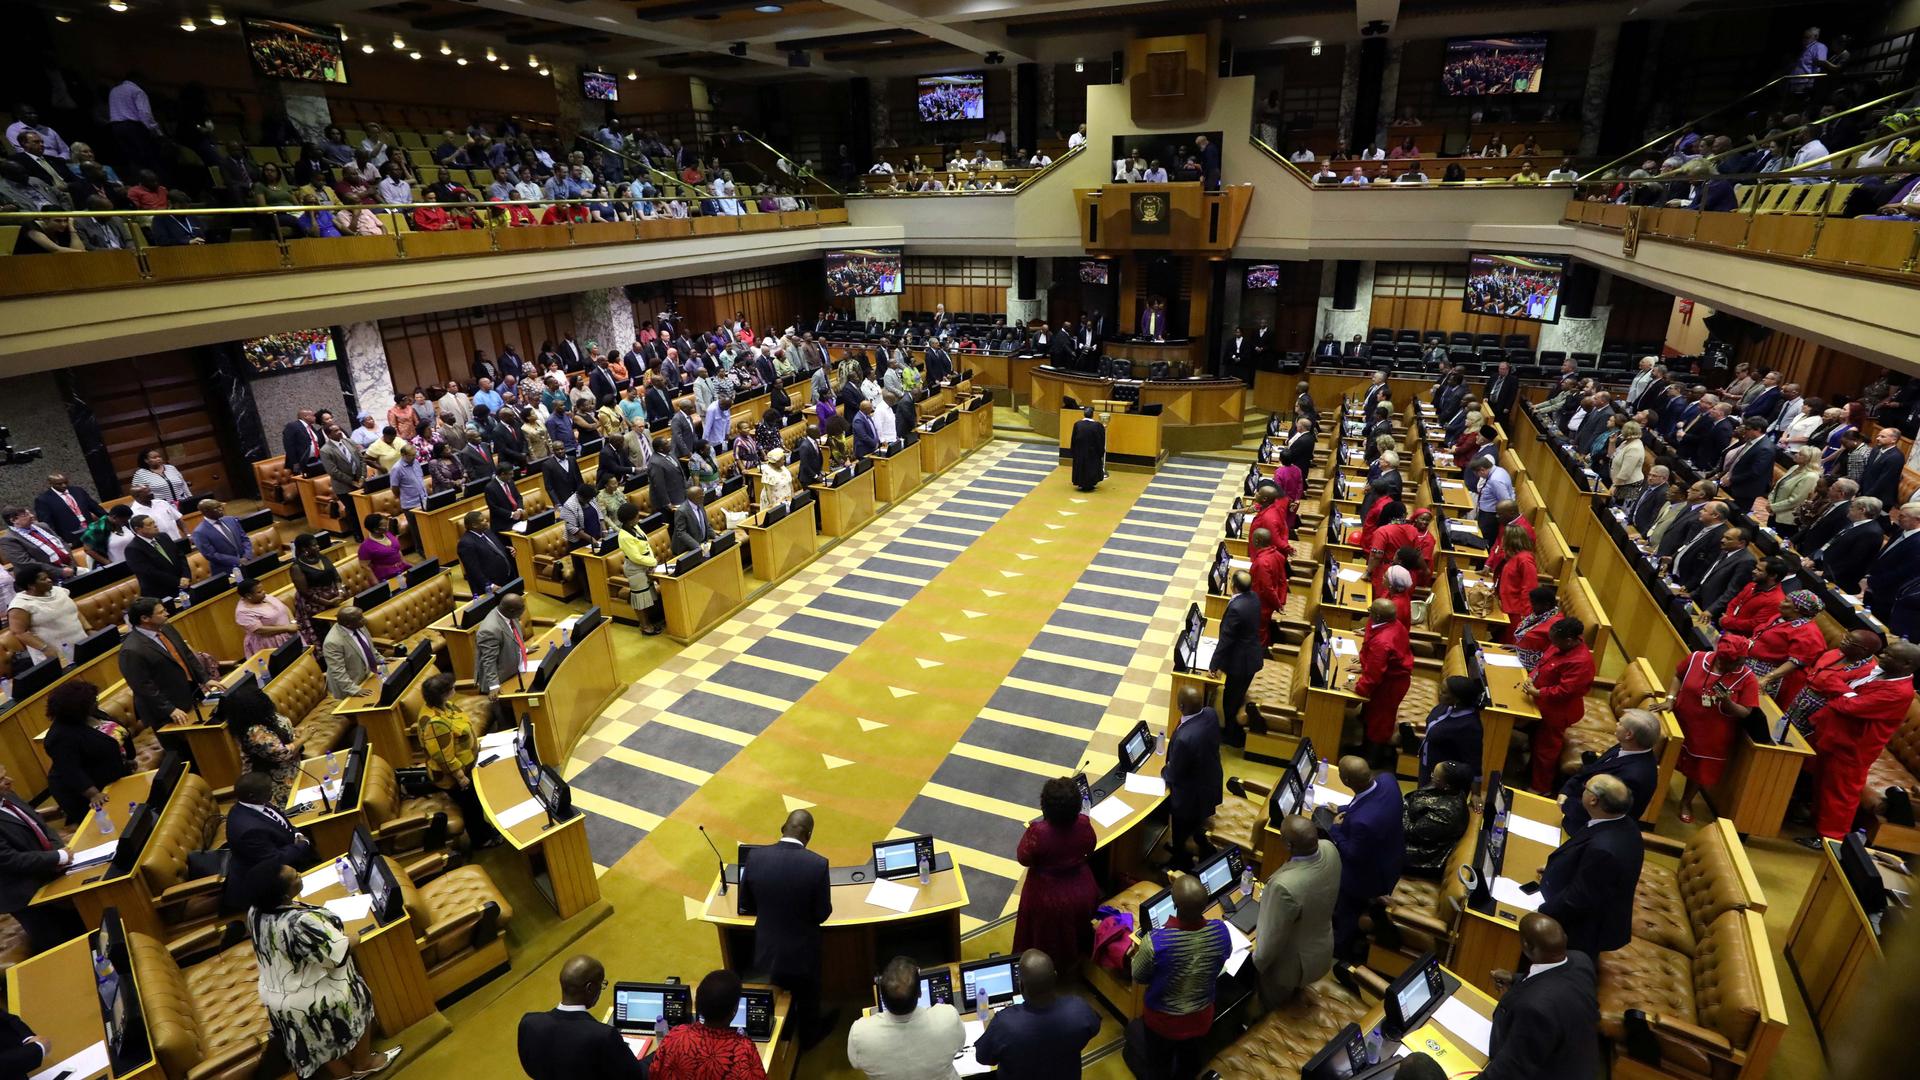 Members of parliament from a top-down view with a podium in the center